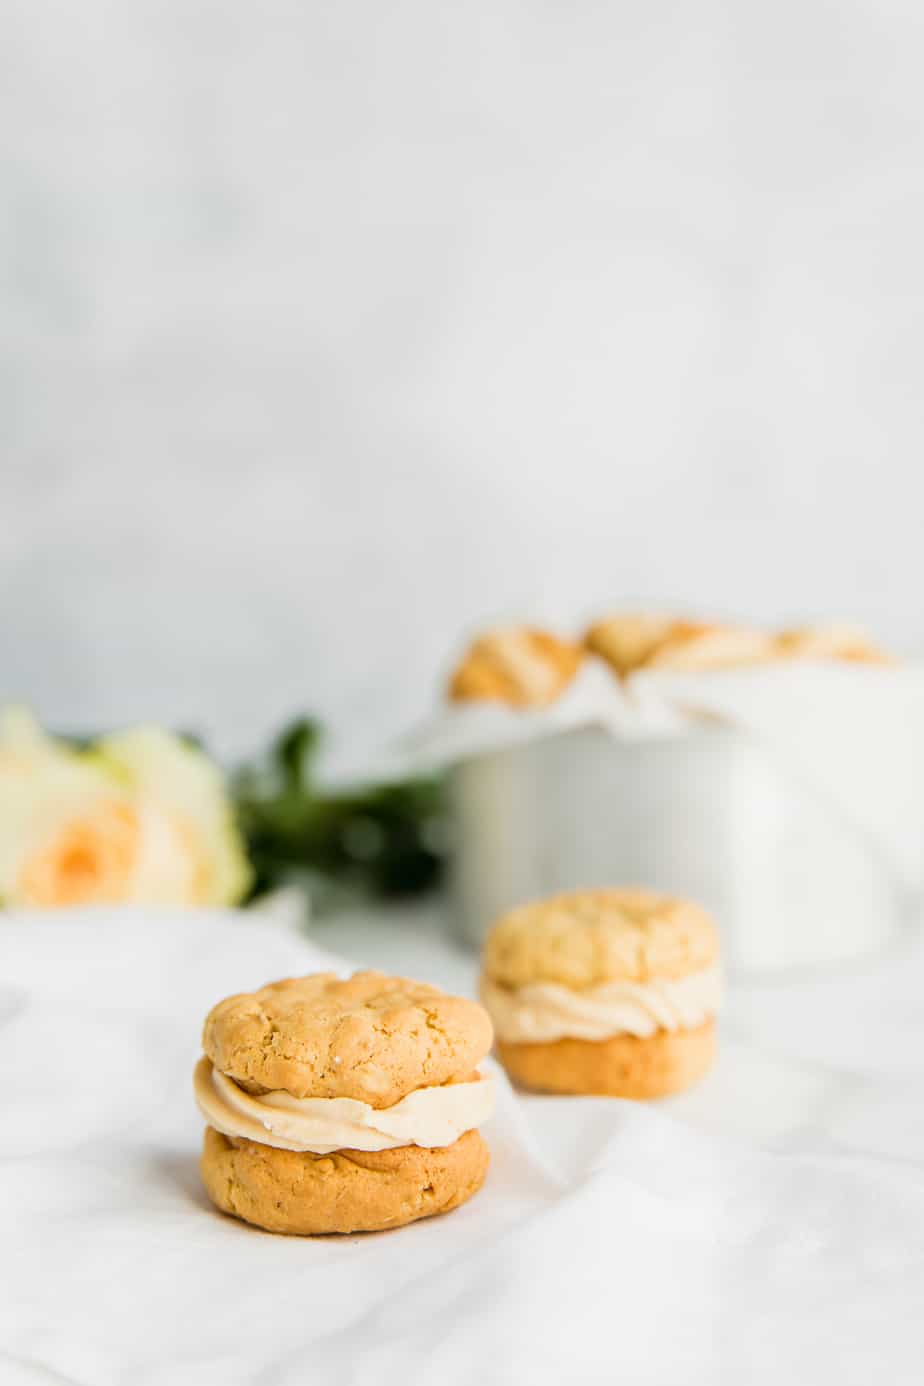 The only thing that beats an oatmeal cookie is an oatmeal cookie sandwich stuffed with Amarula frosting! These are super easy to make, look impressive and are oh so delicious!